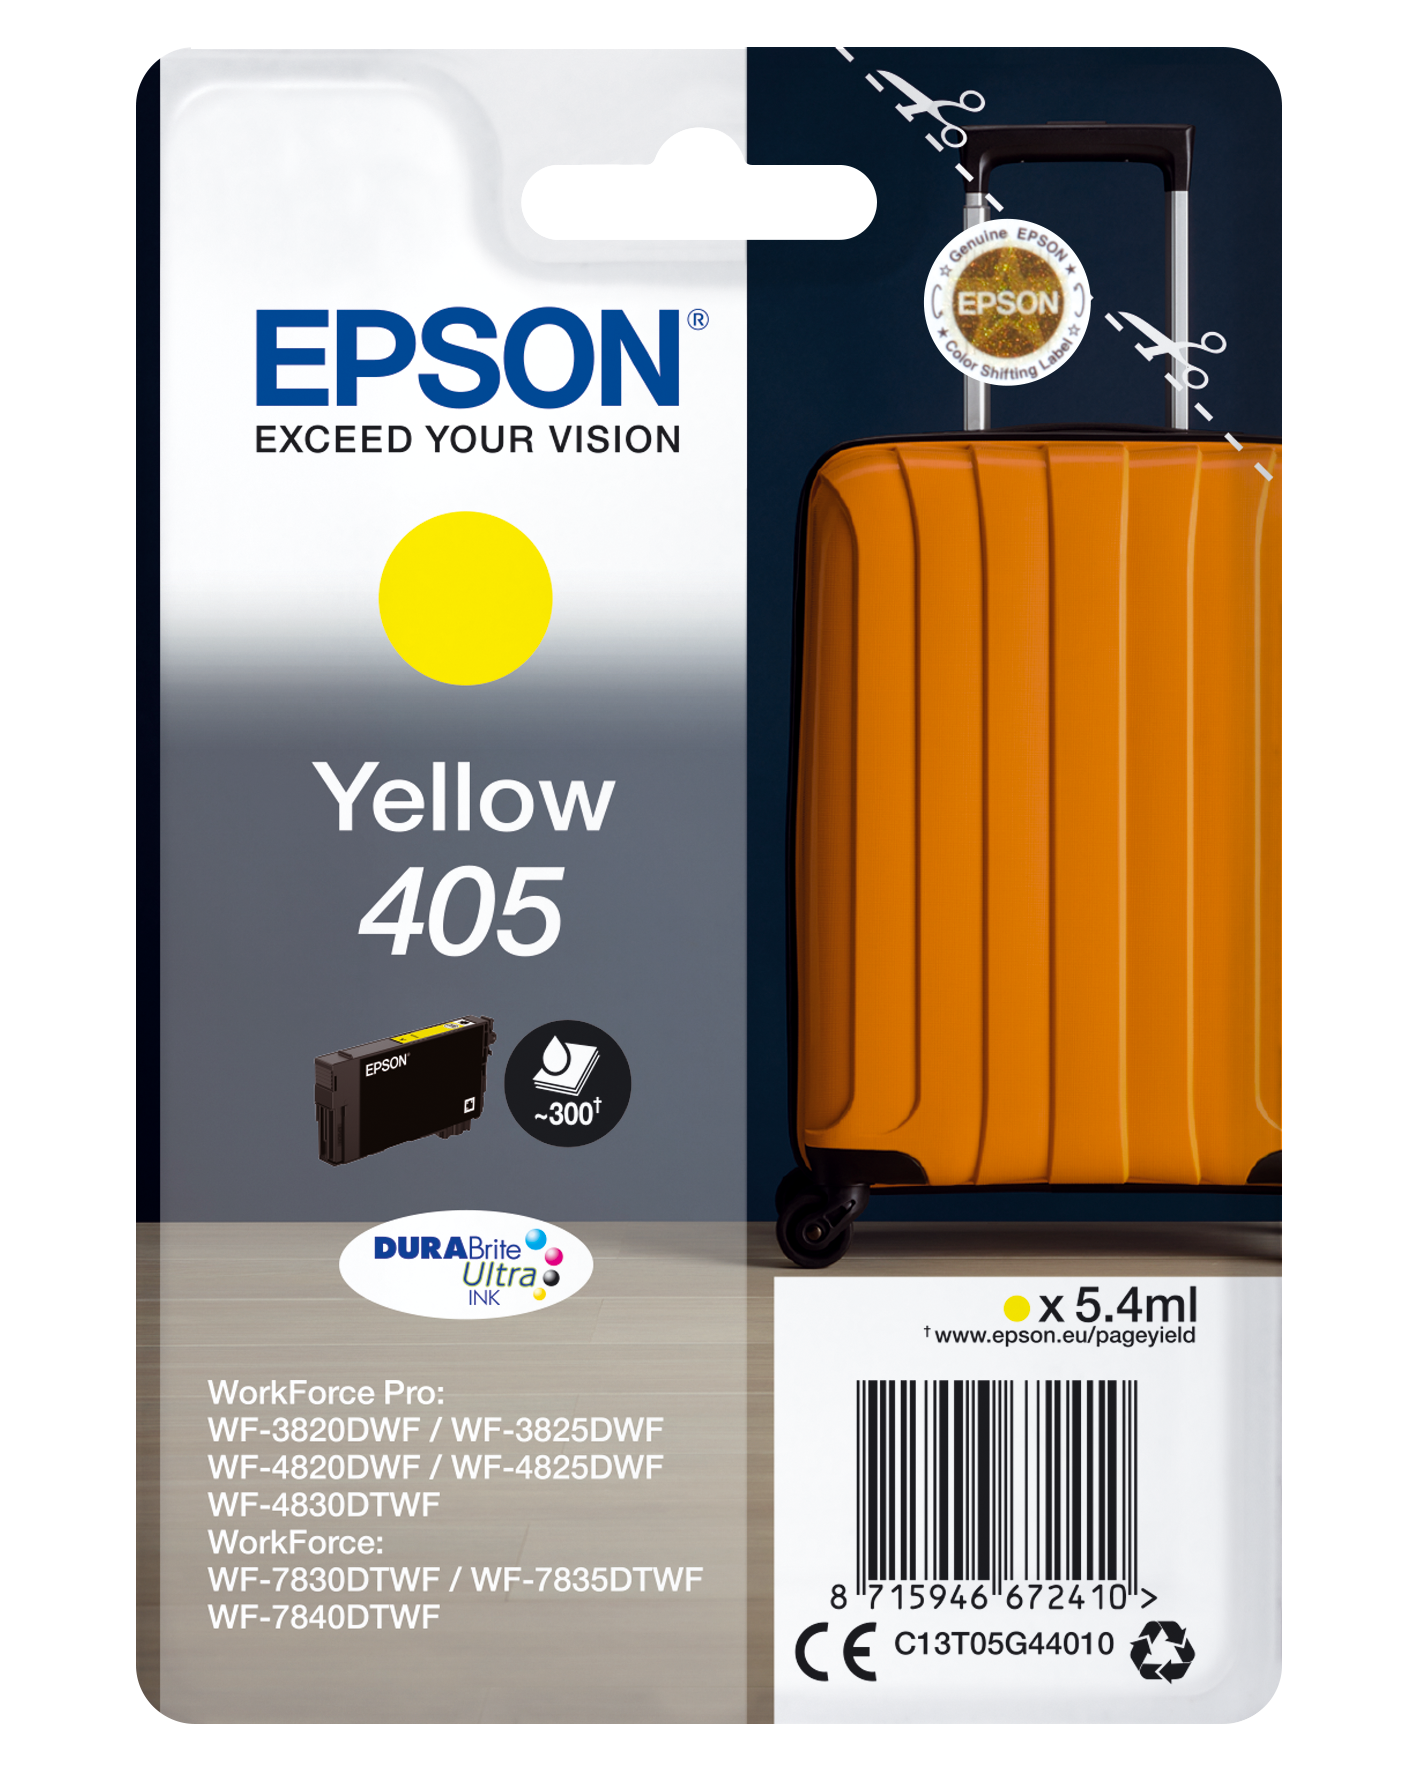 Logisk Tænke pige Singlepack Yellow 405 DURABrite Ultra Ink | Ink Consumables | Ink & Paper |  Products | Epson Europe